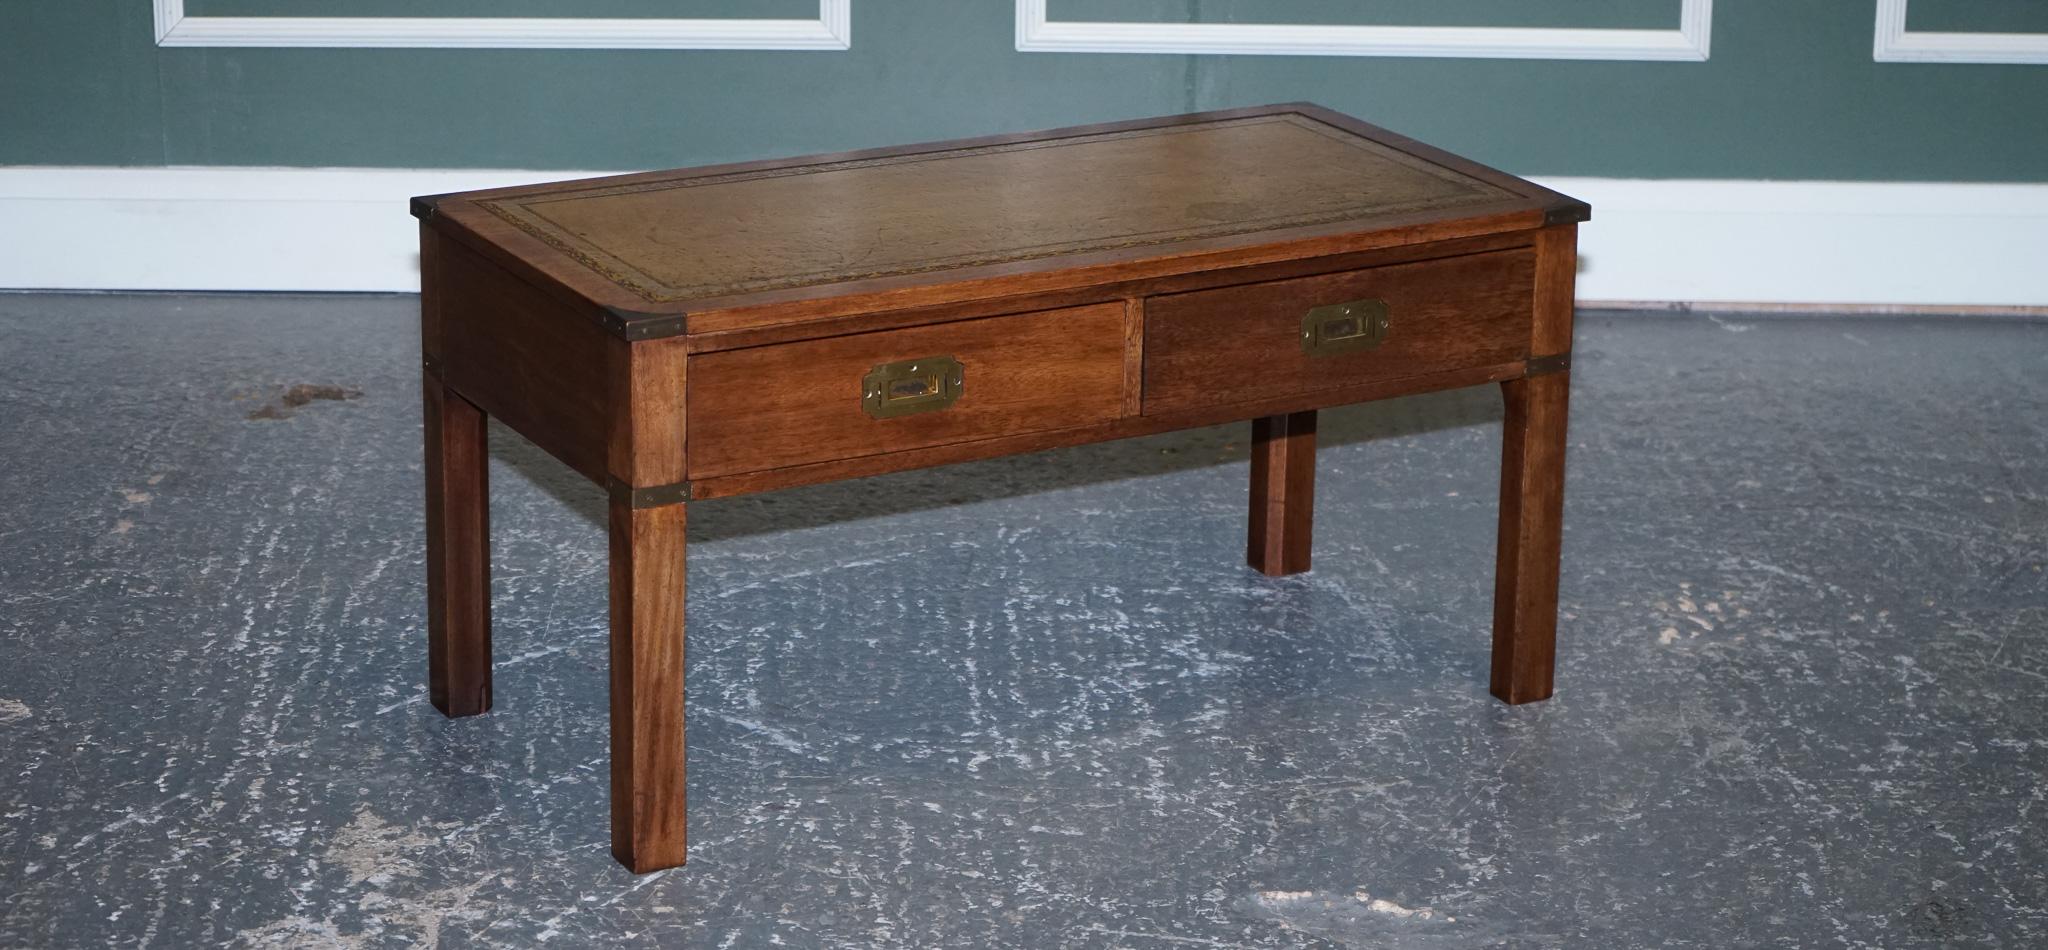 We are delighted to offer for sale this Harrods London Kennedy Military campaign coffee table with a brown leather top.

We have lightly restored this by cleaning it all over, waxing and hand polishing.

Please carefully examine the pictures to